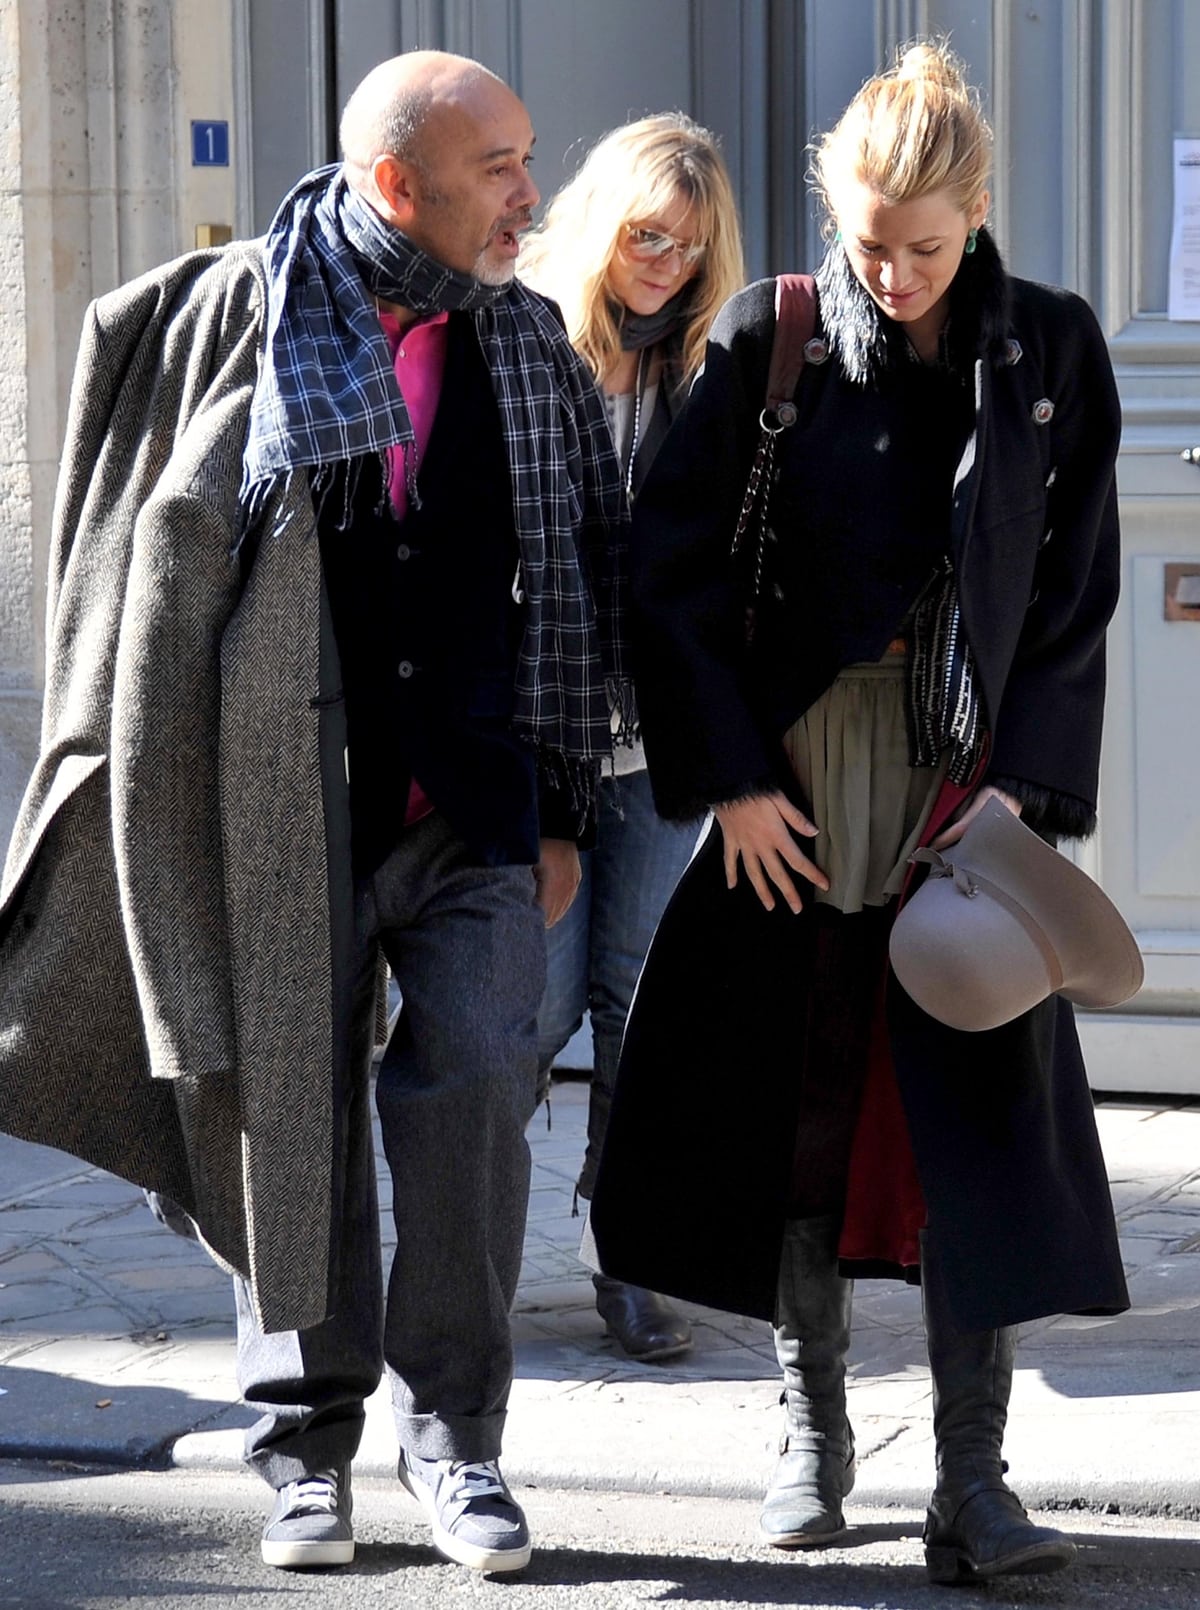 Blake Lively out with shoe designer Christian Louboutin in Paris, France, on March 7, 2011